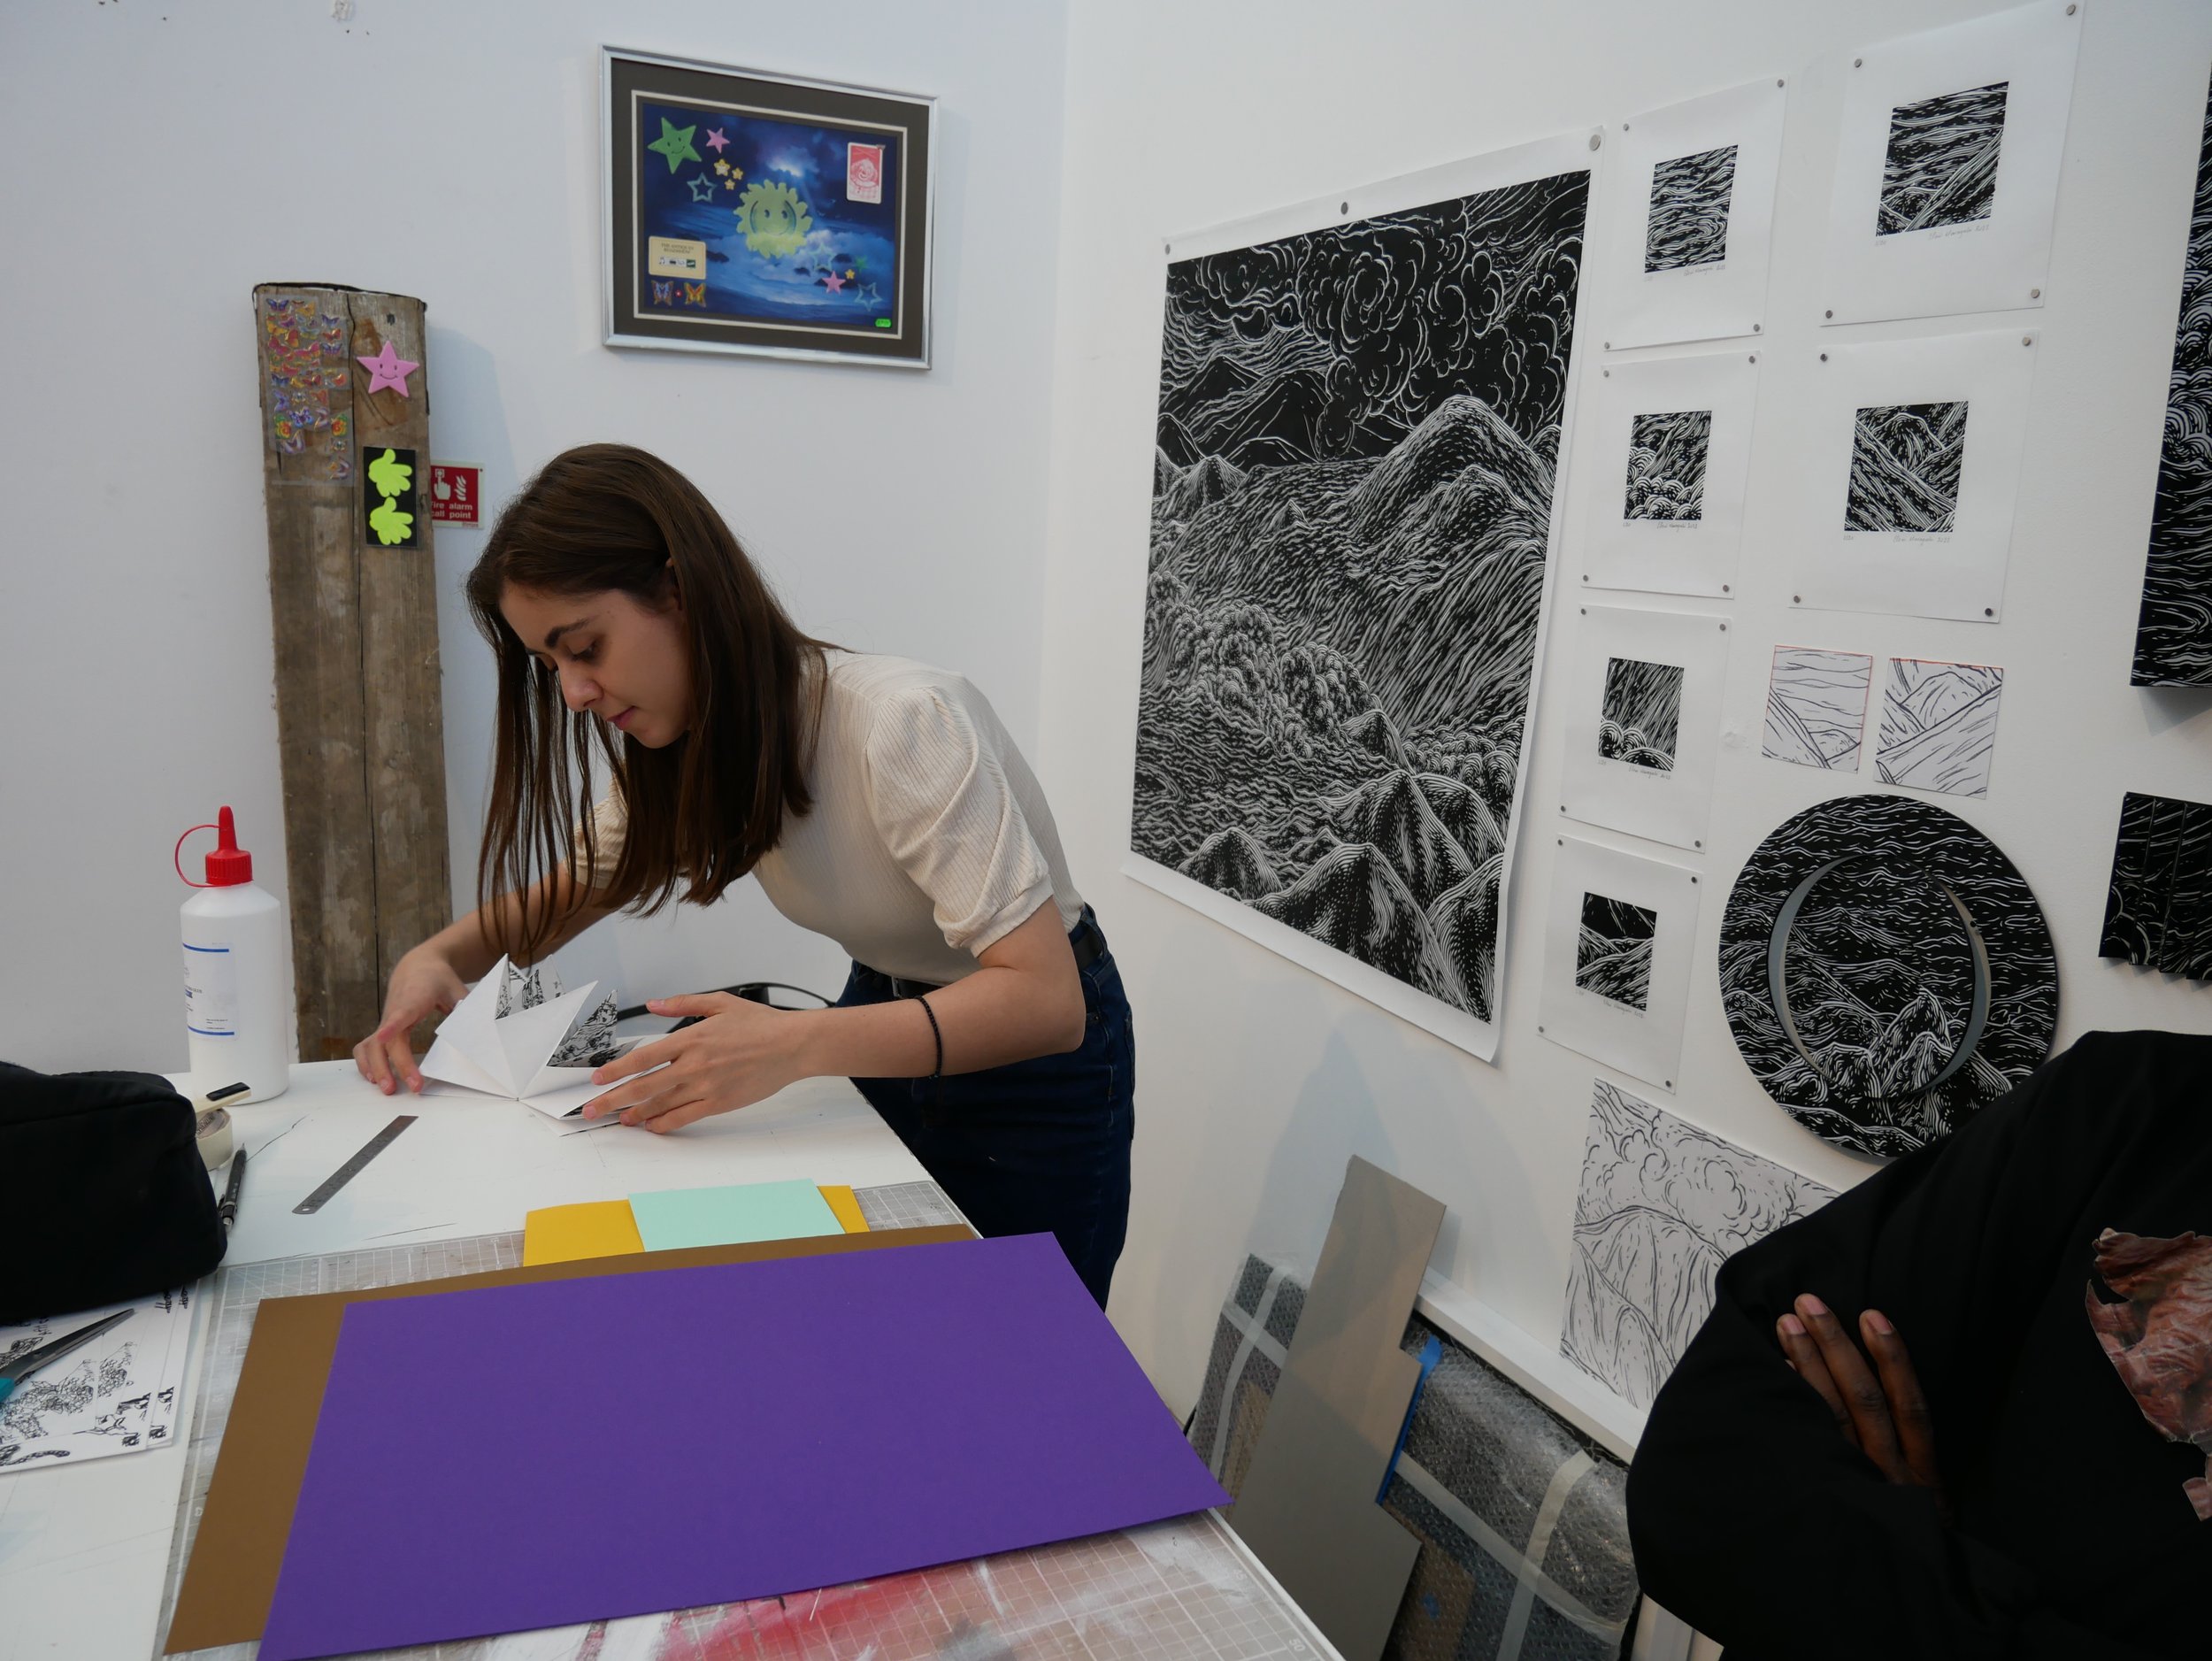  This series of photographs shows Eleni and Leslie creating folded books together in Leslie’s studio. Eleni is in a beige top and dark jeans, and Leslie is in a black top with a printed picture of a brown bear hanging around his neck. Artwork feature